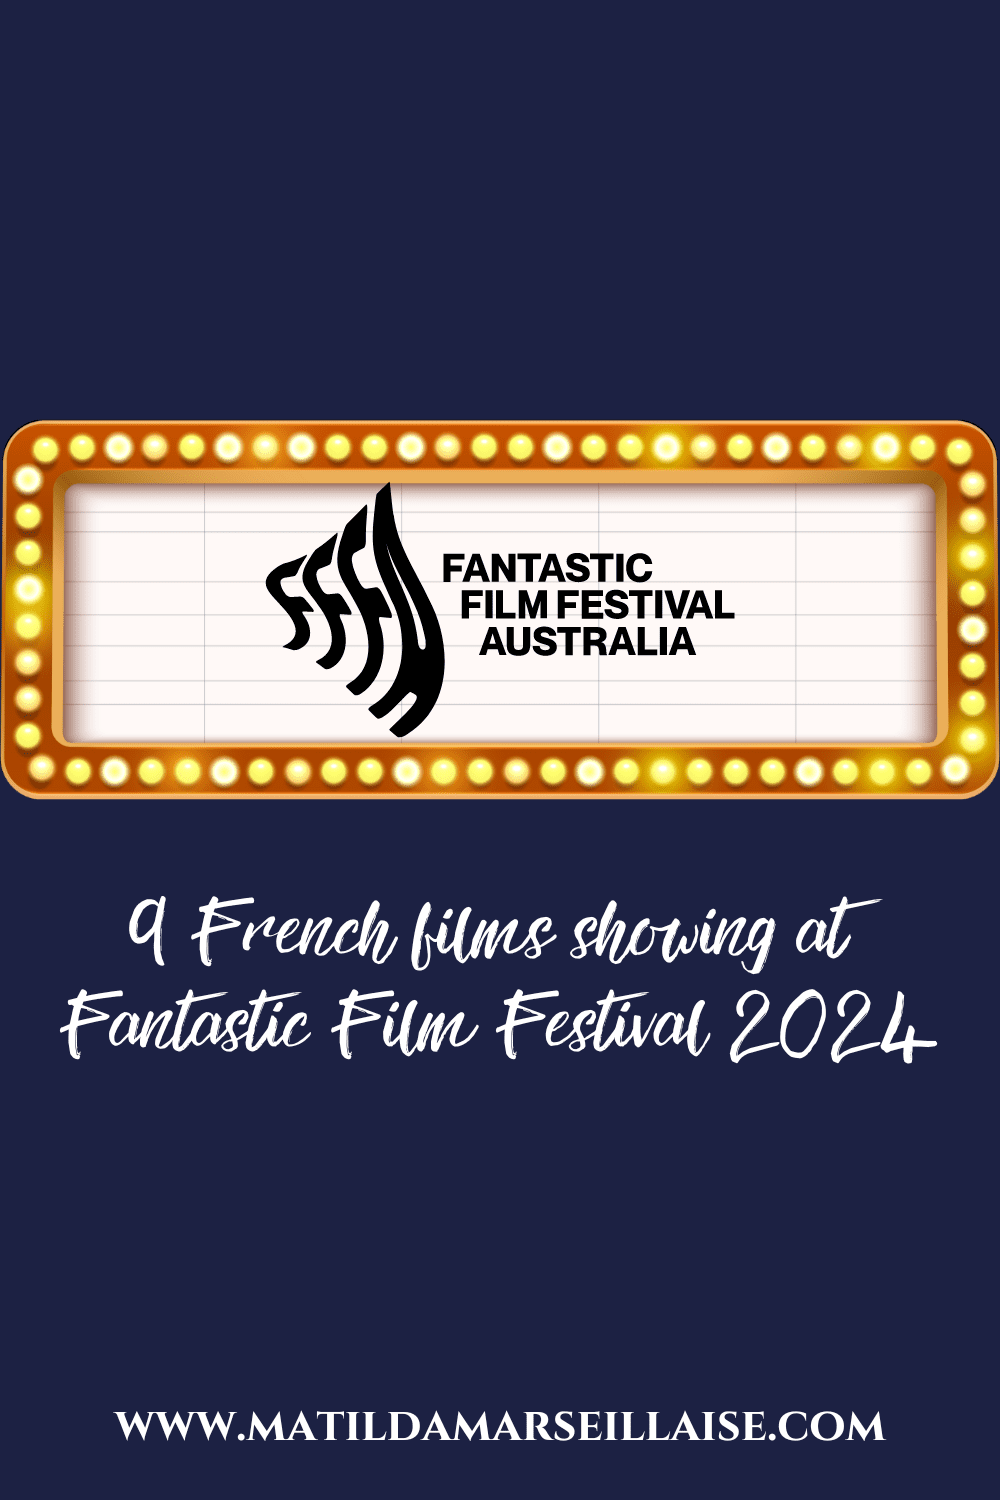 Fantastic Film Festival 2024 brings 9 French films to Melbourne and Sydney this month